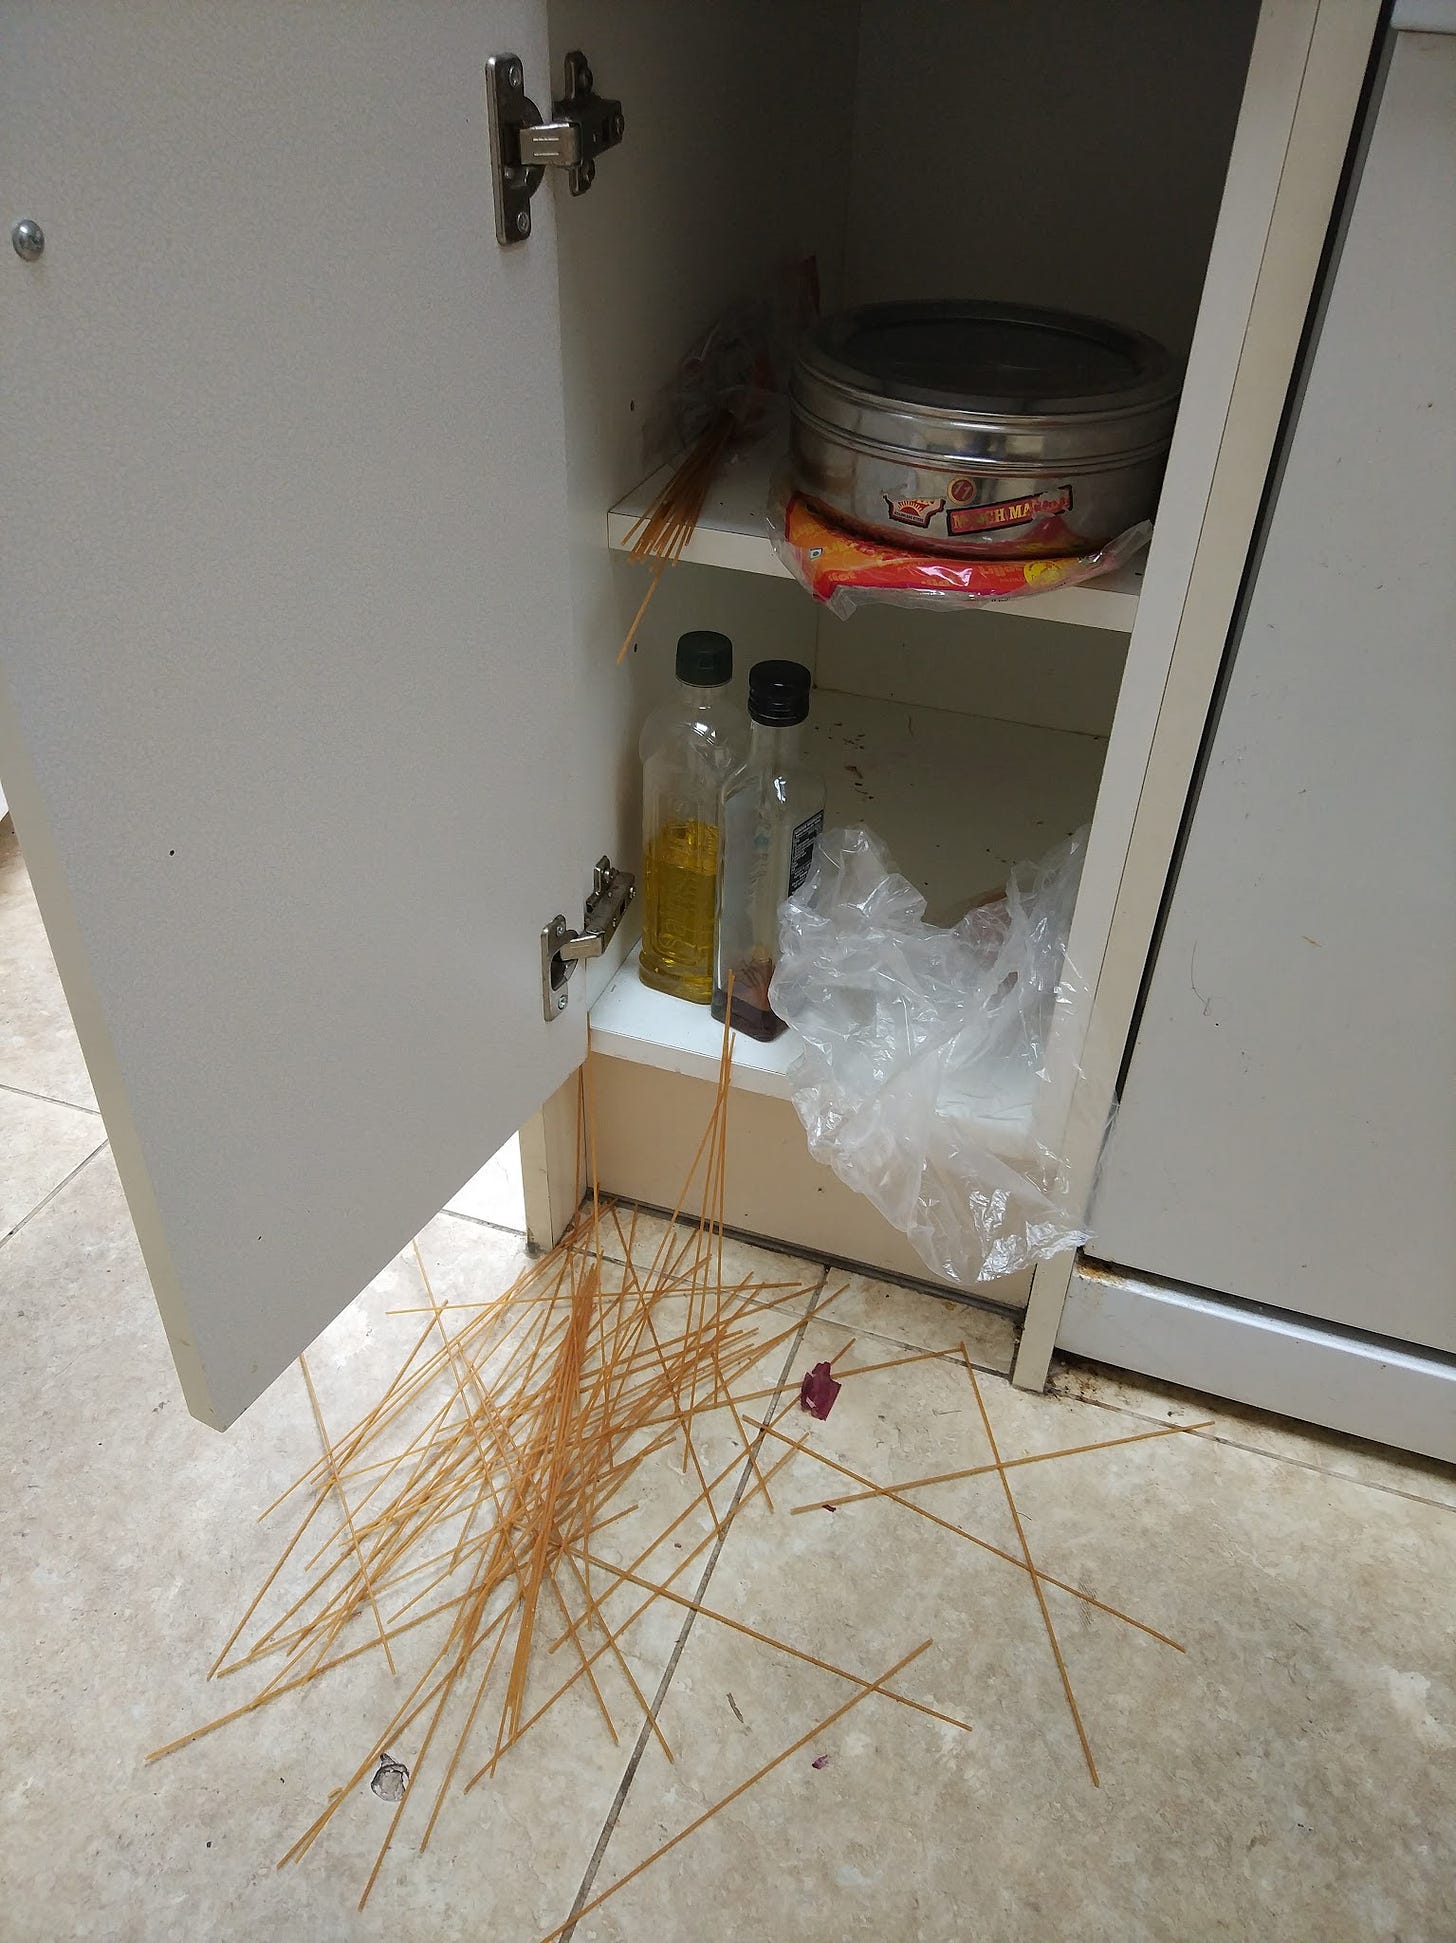 Yellow, Teflon-cut spaghetti falling out of a kitchen cupboard into a pile on the floor